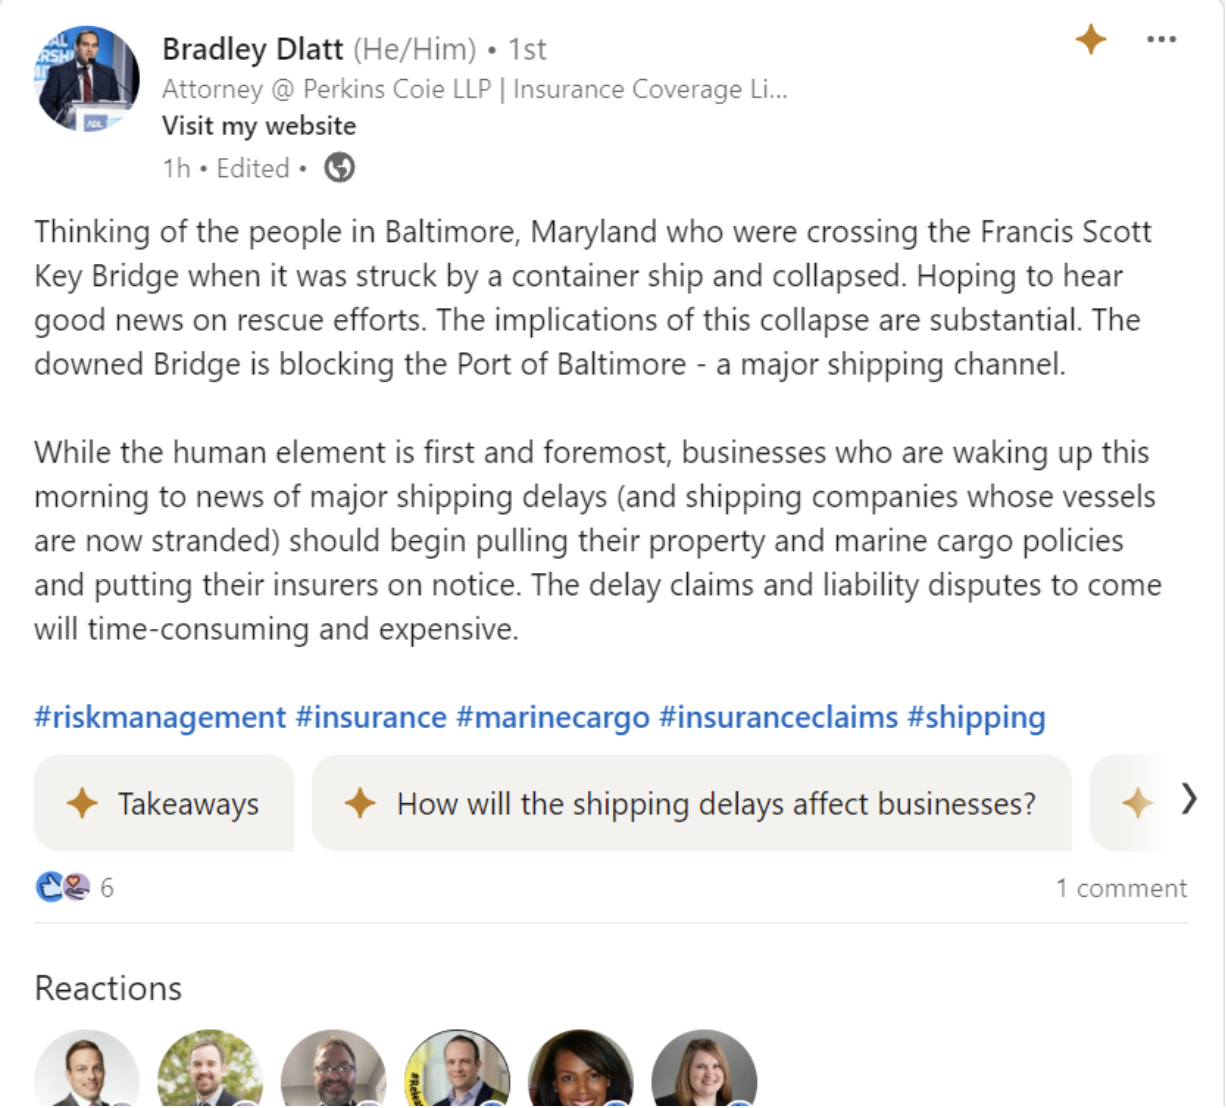 web page - Bradley Dlatt HeHim 1st Attorney Coie Llp | Insurance Coverage Li... Visit my website 1h Edited C Thinking of the people in Baltimore, Maryland who were crossing the Francis Scott Key Bridge when it was struck by a container ship and collapsed.